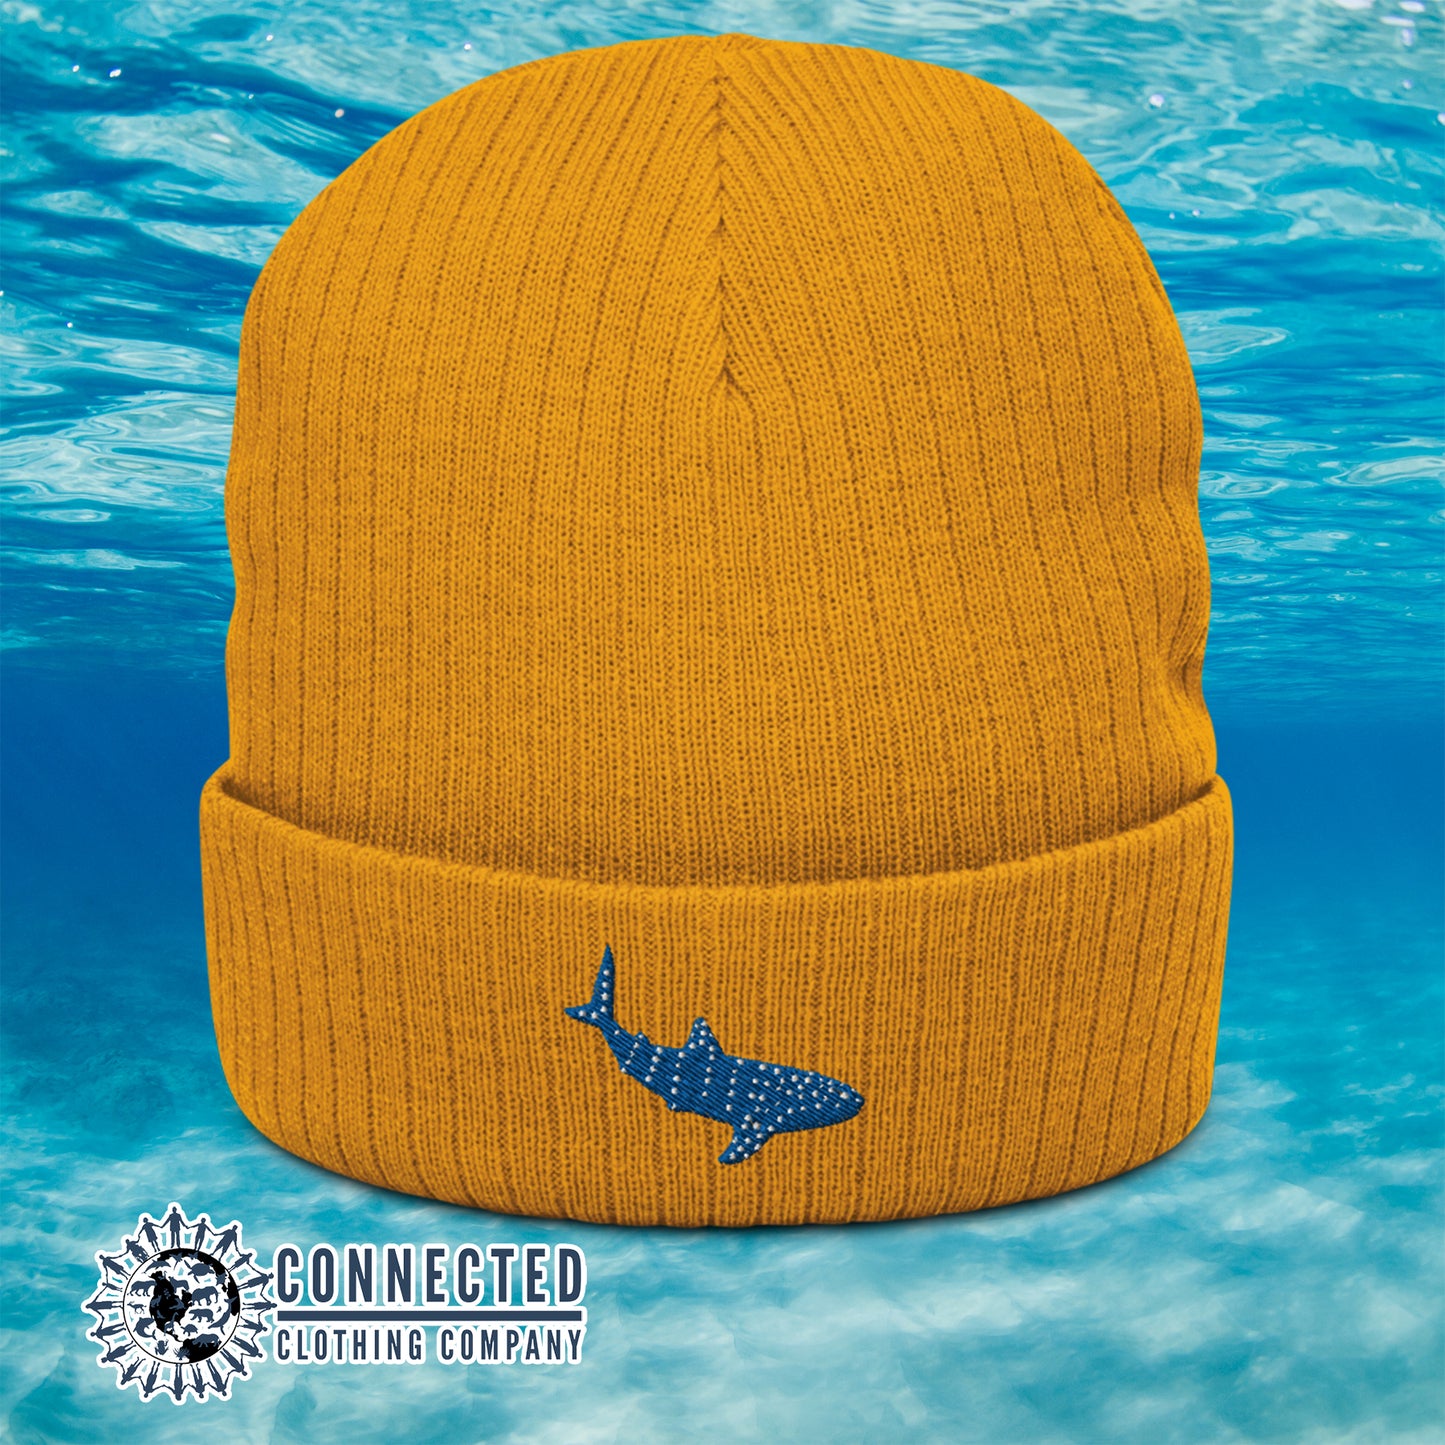 Mustard Whale Shark Embroidered Recycled Cuffed Beanie - sweetsherriloudesigns - Ethically and Sustainably Made - 10% donated to Mission Blue ocean conservation